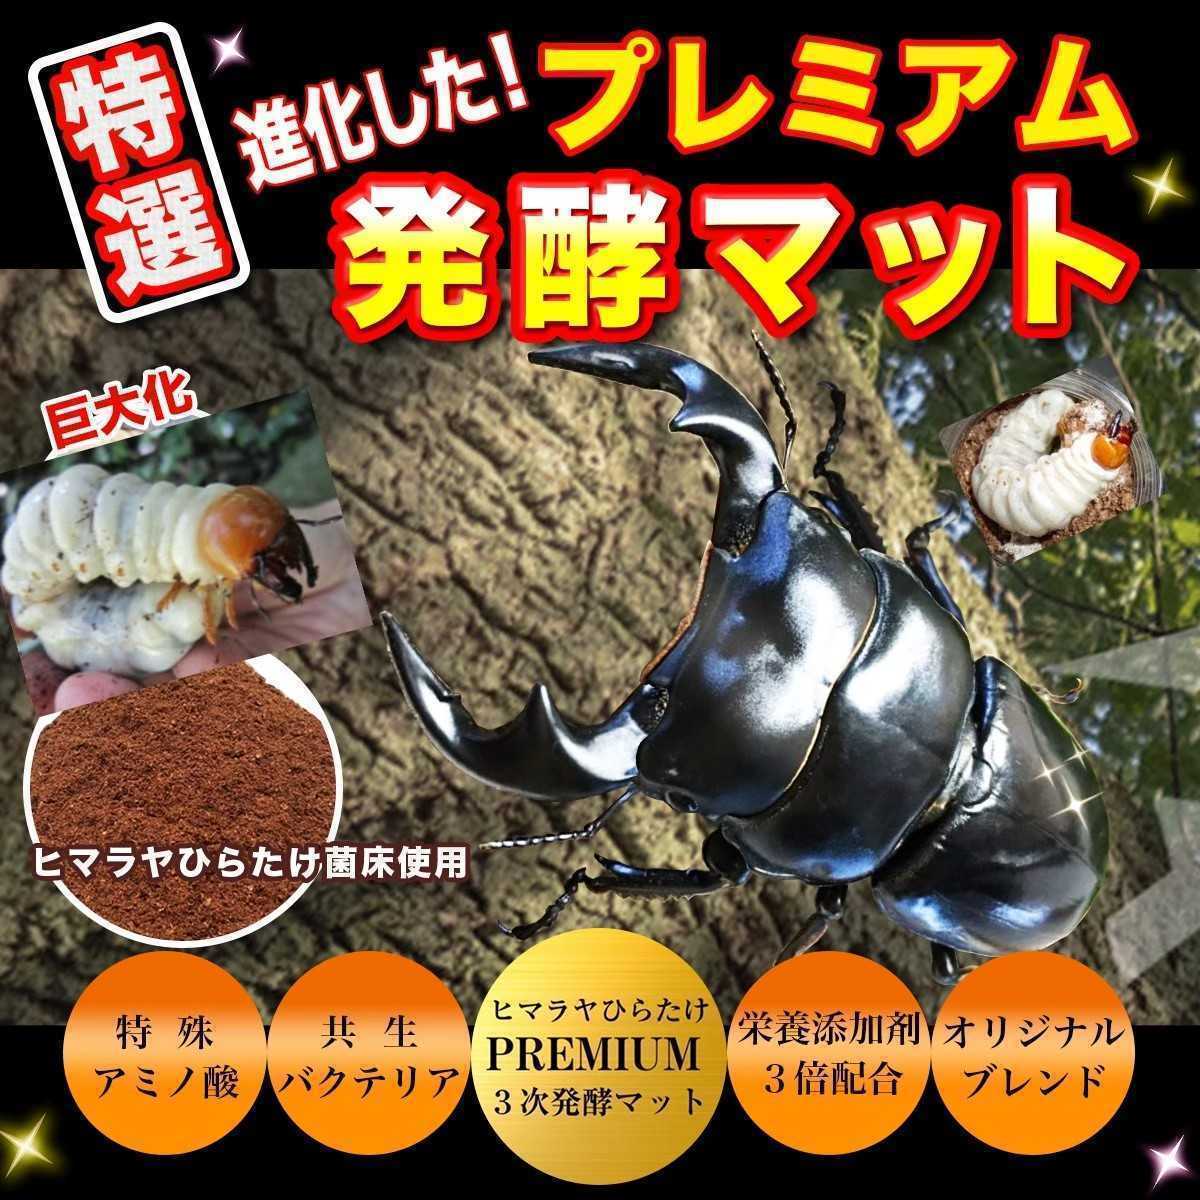  finest quality! premium 3 next departure . rhinoceros beetle mat [5 sack ]tore Hello s* chitosan * symbiosis bacteria 3 times combination production egg also eminent. . insect ... not 